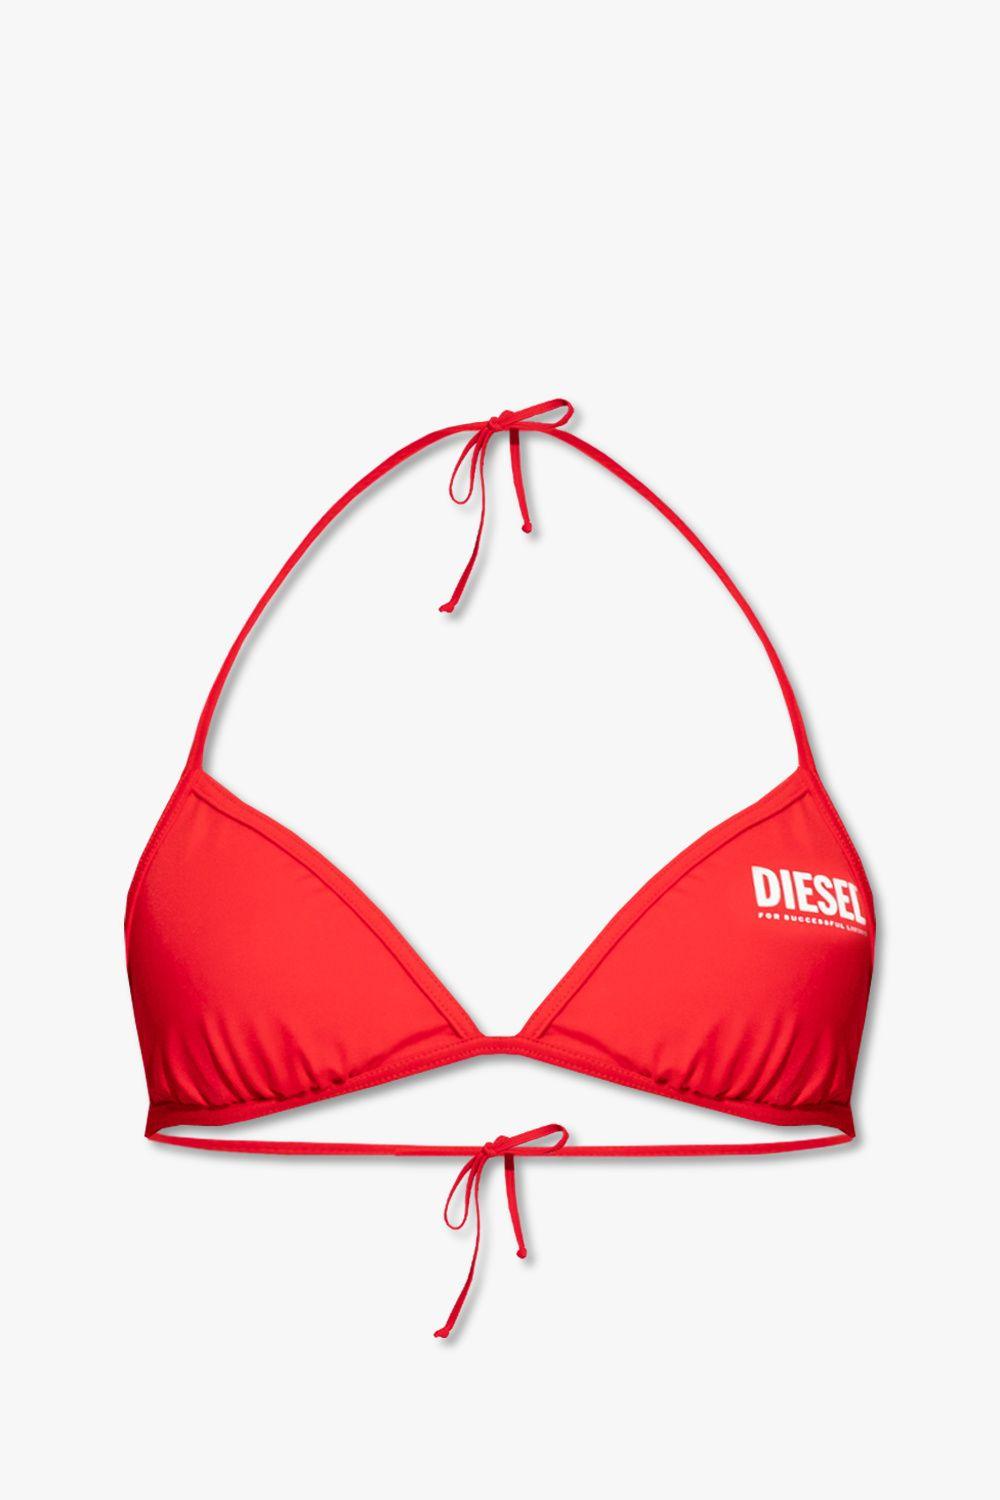 DIESEL 'bfb-sees' Swimsuit Top in Red | Lyst